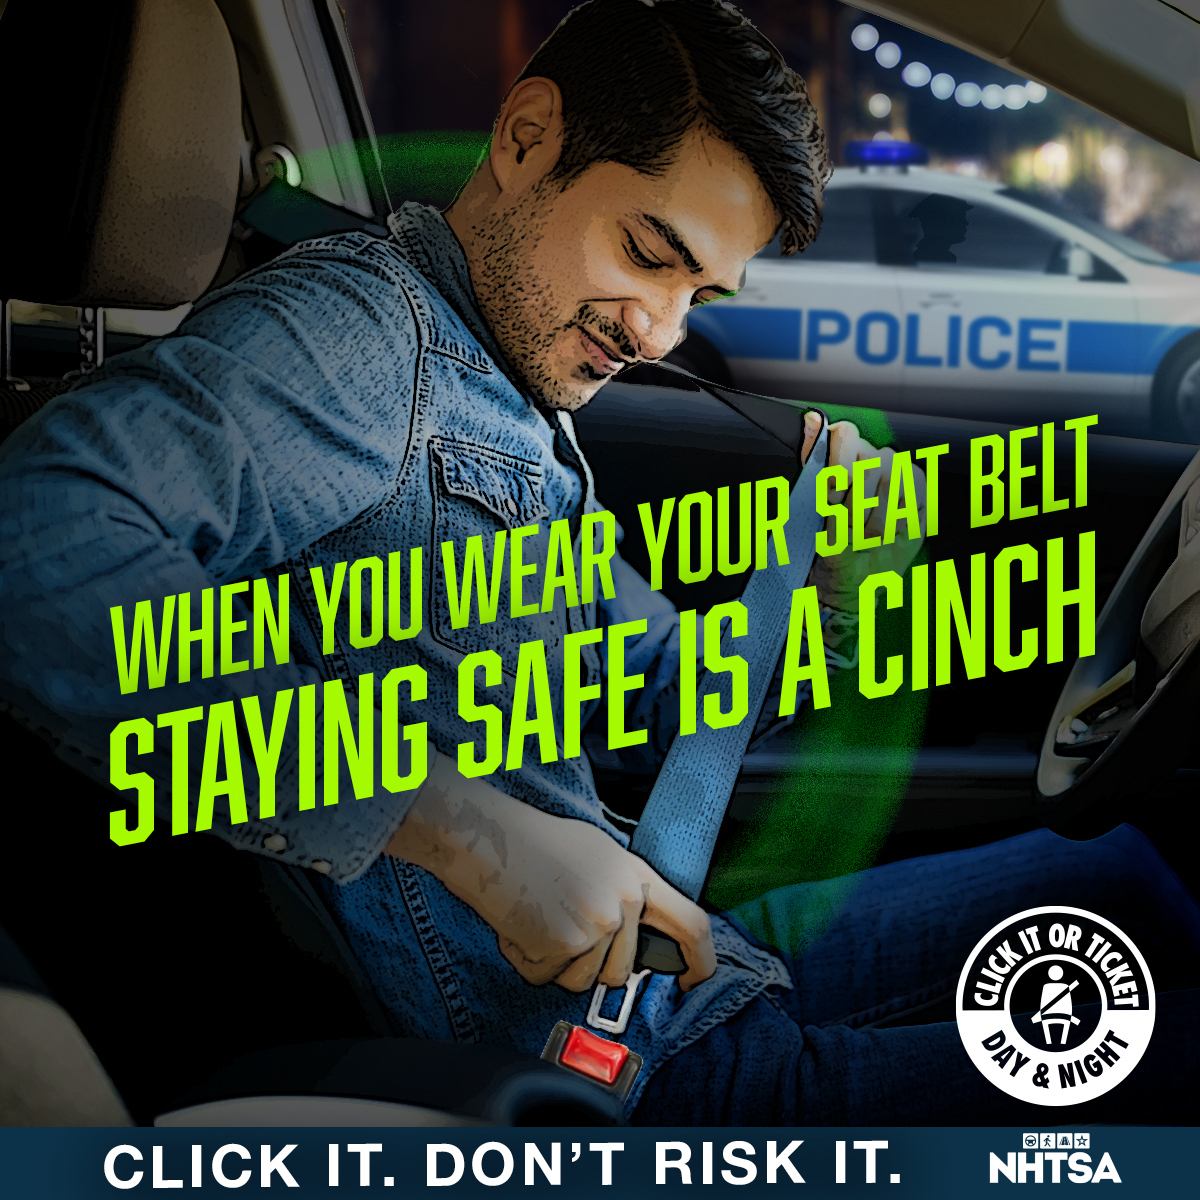 Not buckling your seat belt can lead to consequences that go far beyond a ticket. #ClickItOrTicket #BuckleUpPhoneDown